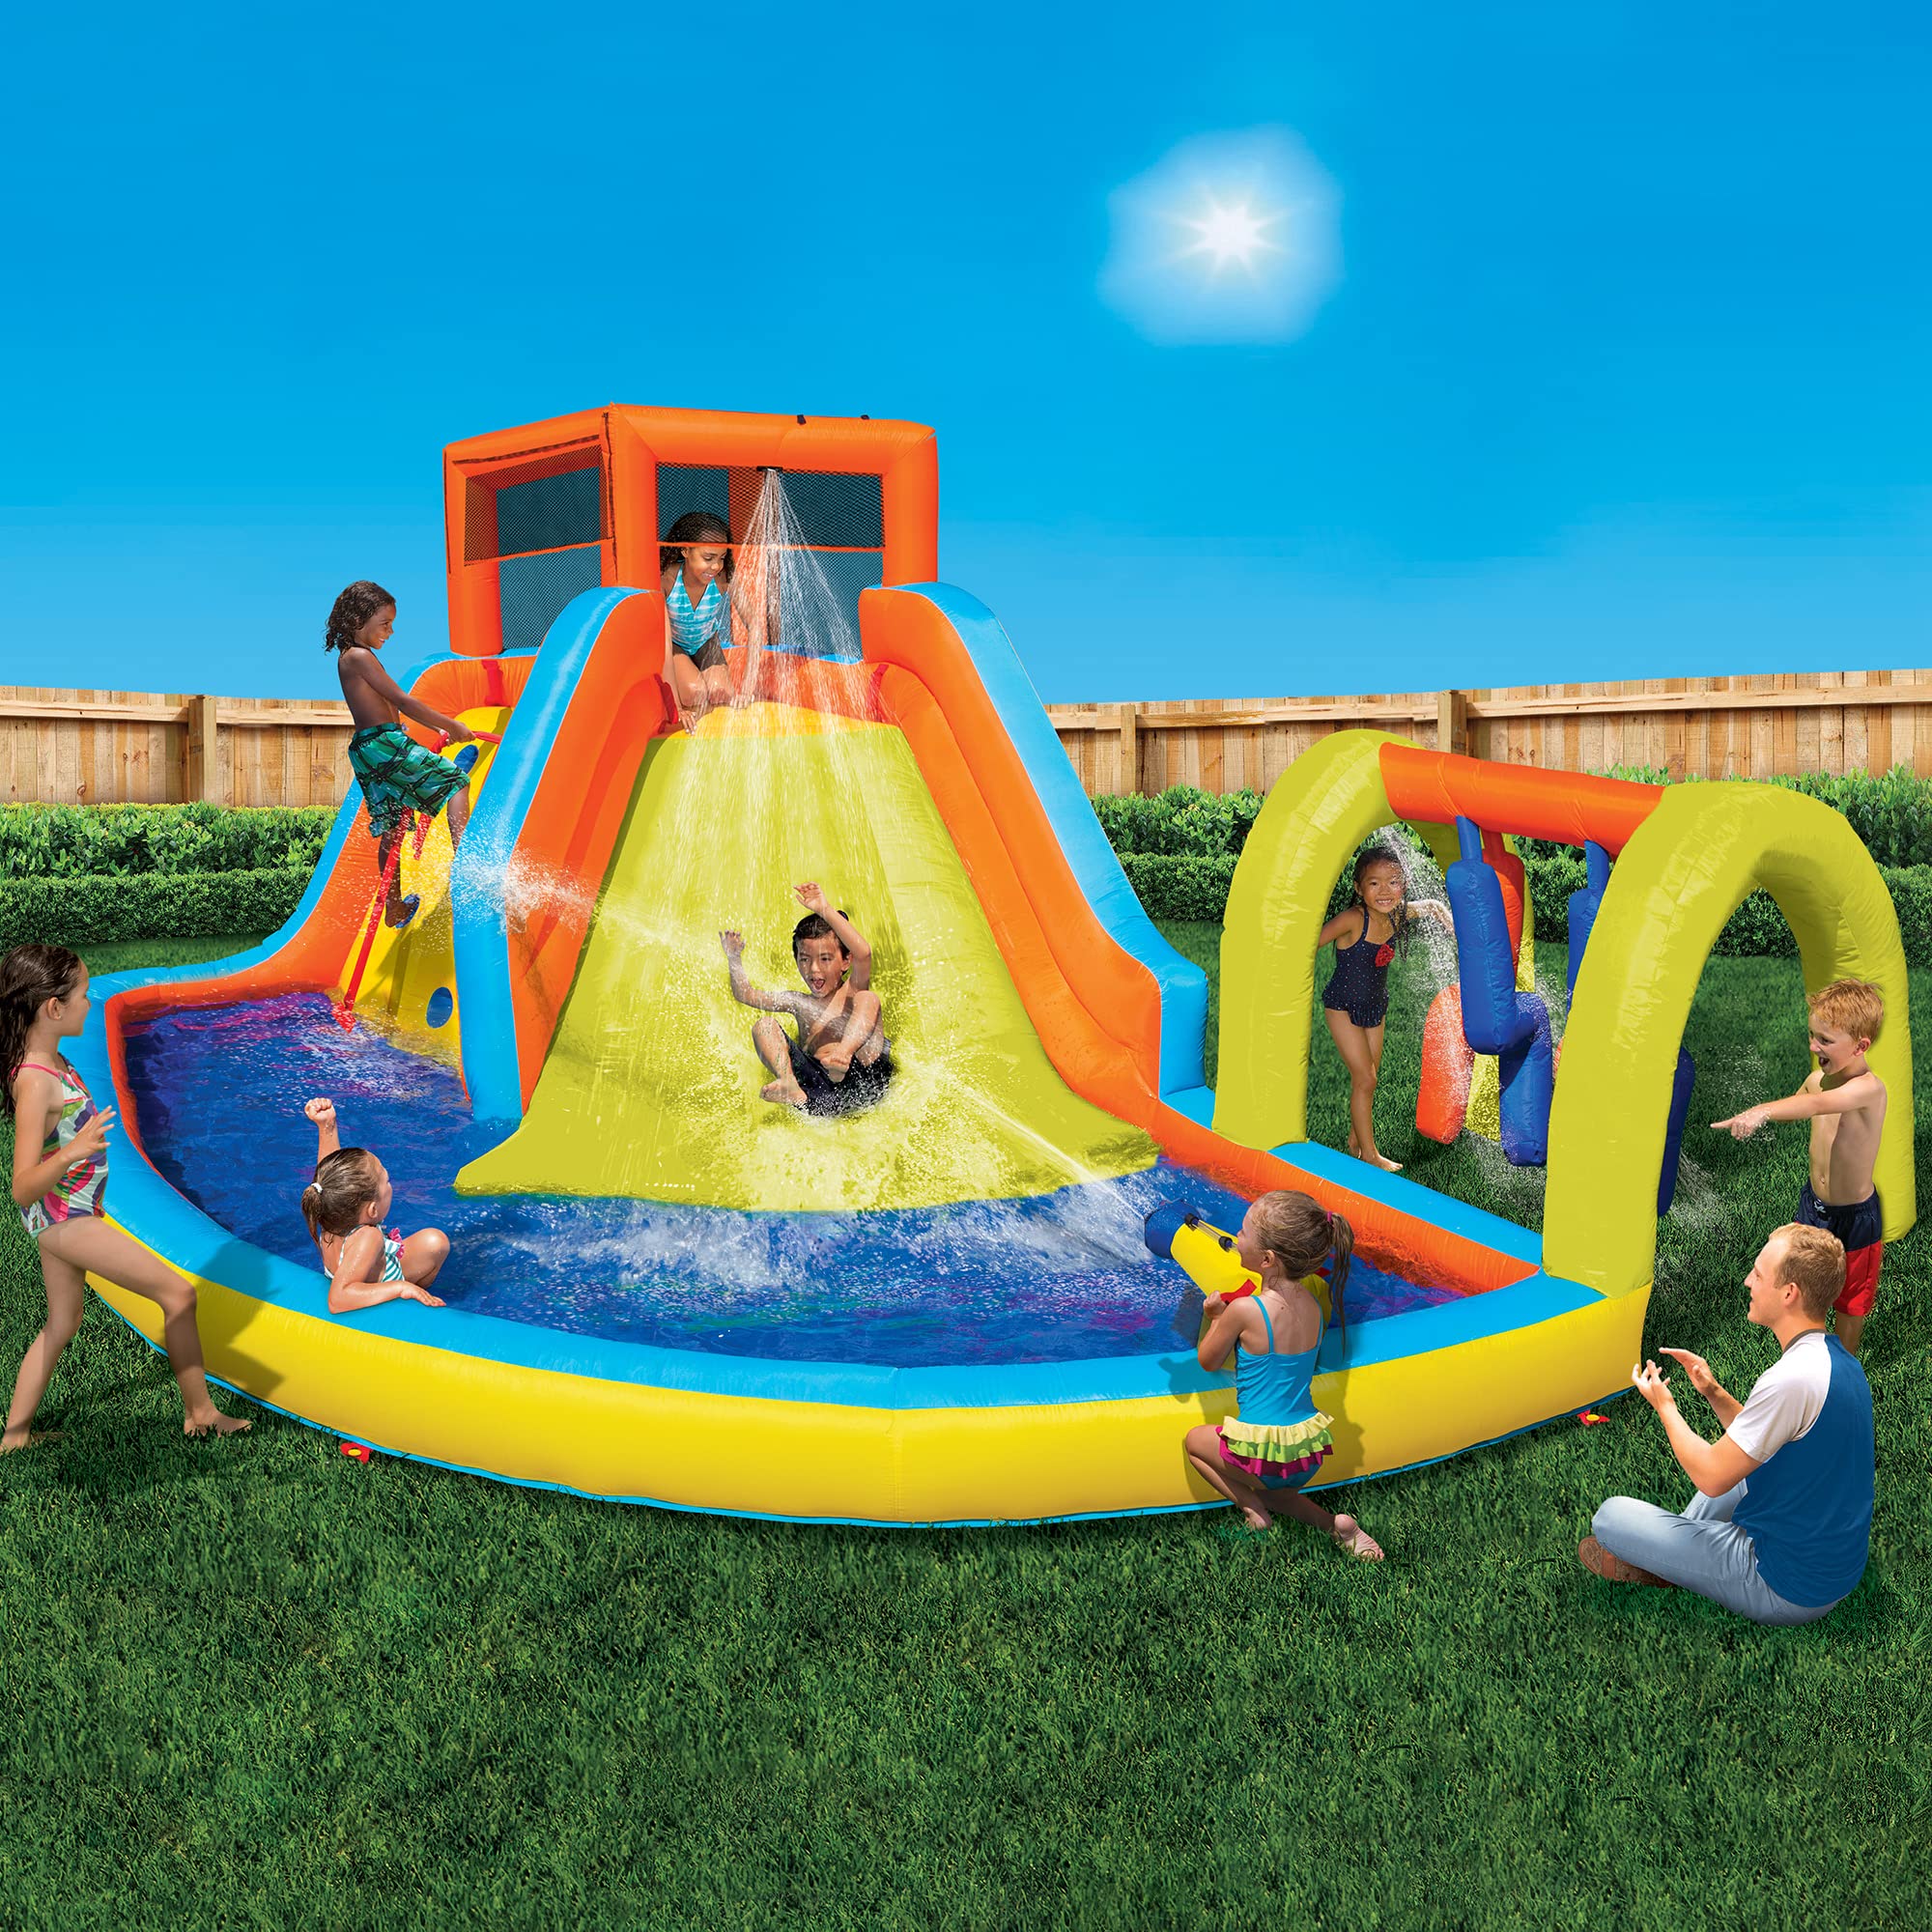 BANZAI Inflatable Summit Splash Adventure Water Park - Climbing Wall & Rope | Water-Blasting Cannon | Sprinkling Obstacle Arch $280